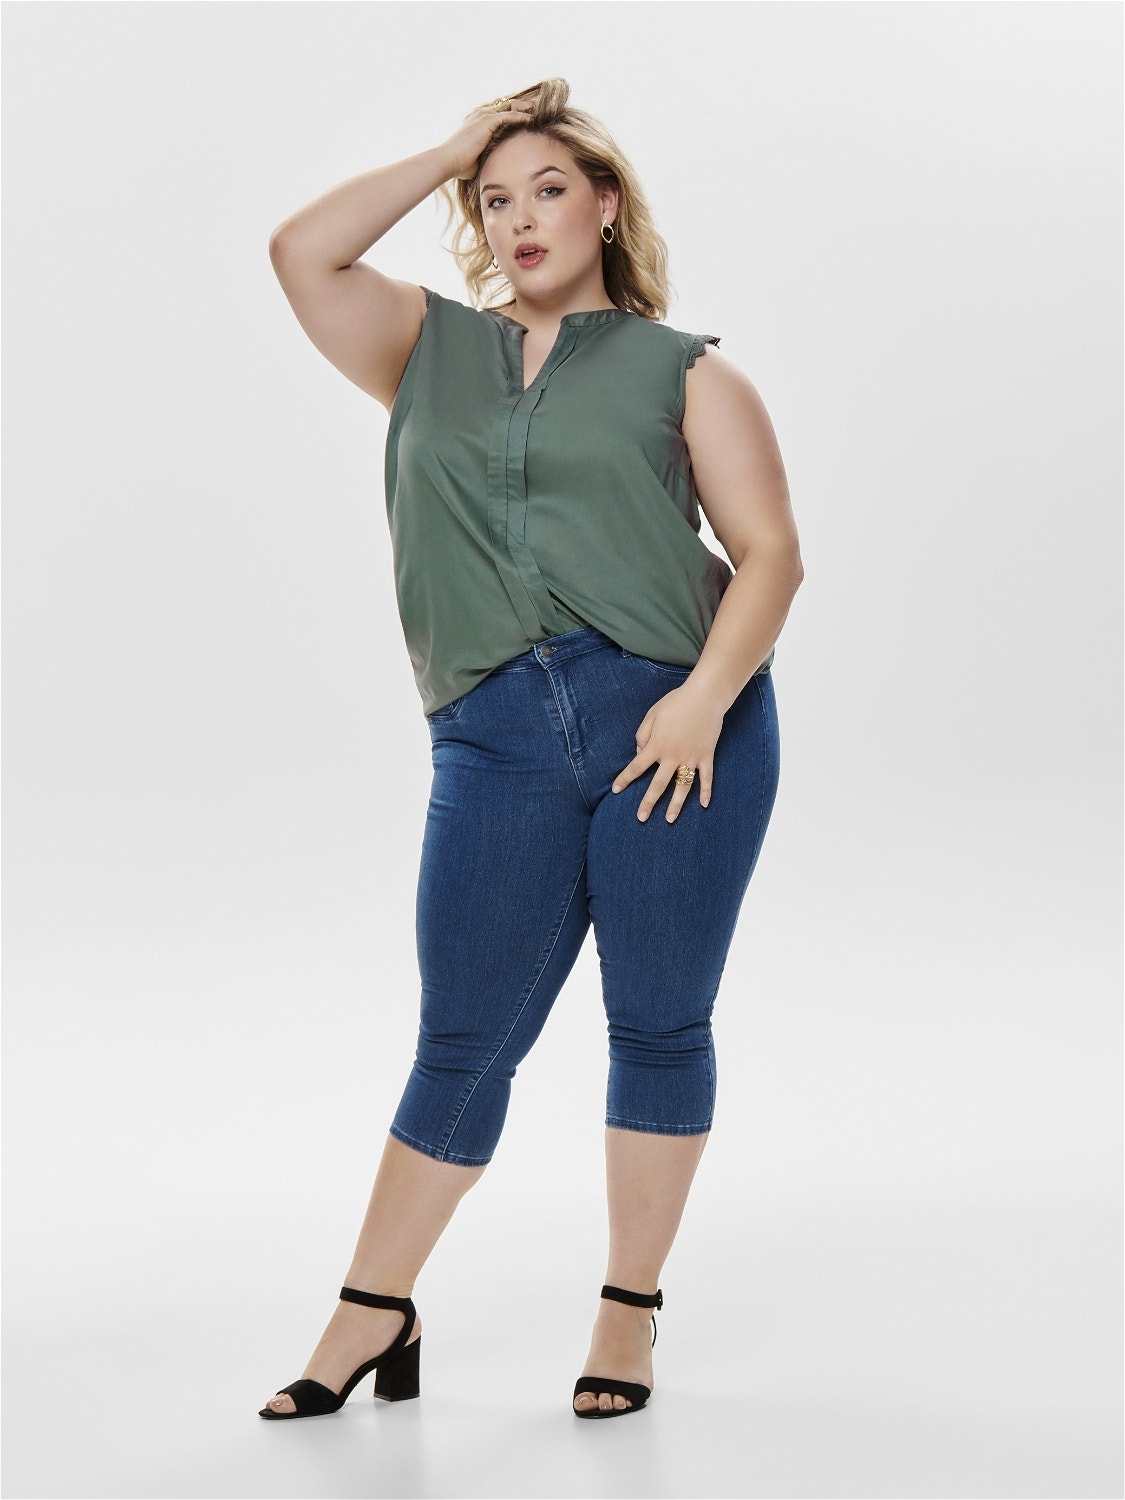 ONLY Curvy loose fit Mouwloze top -Balsam Green - 15187018